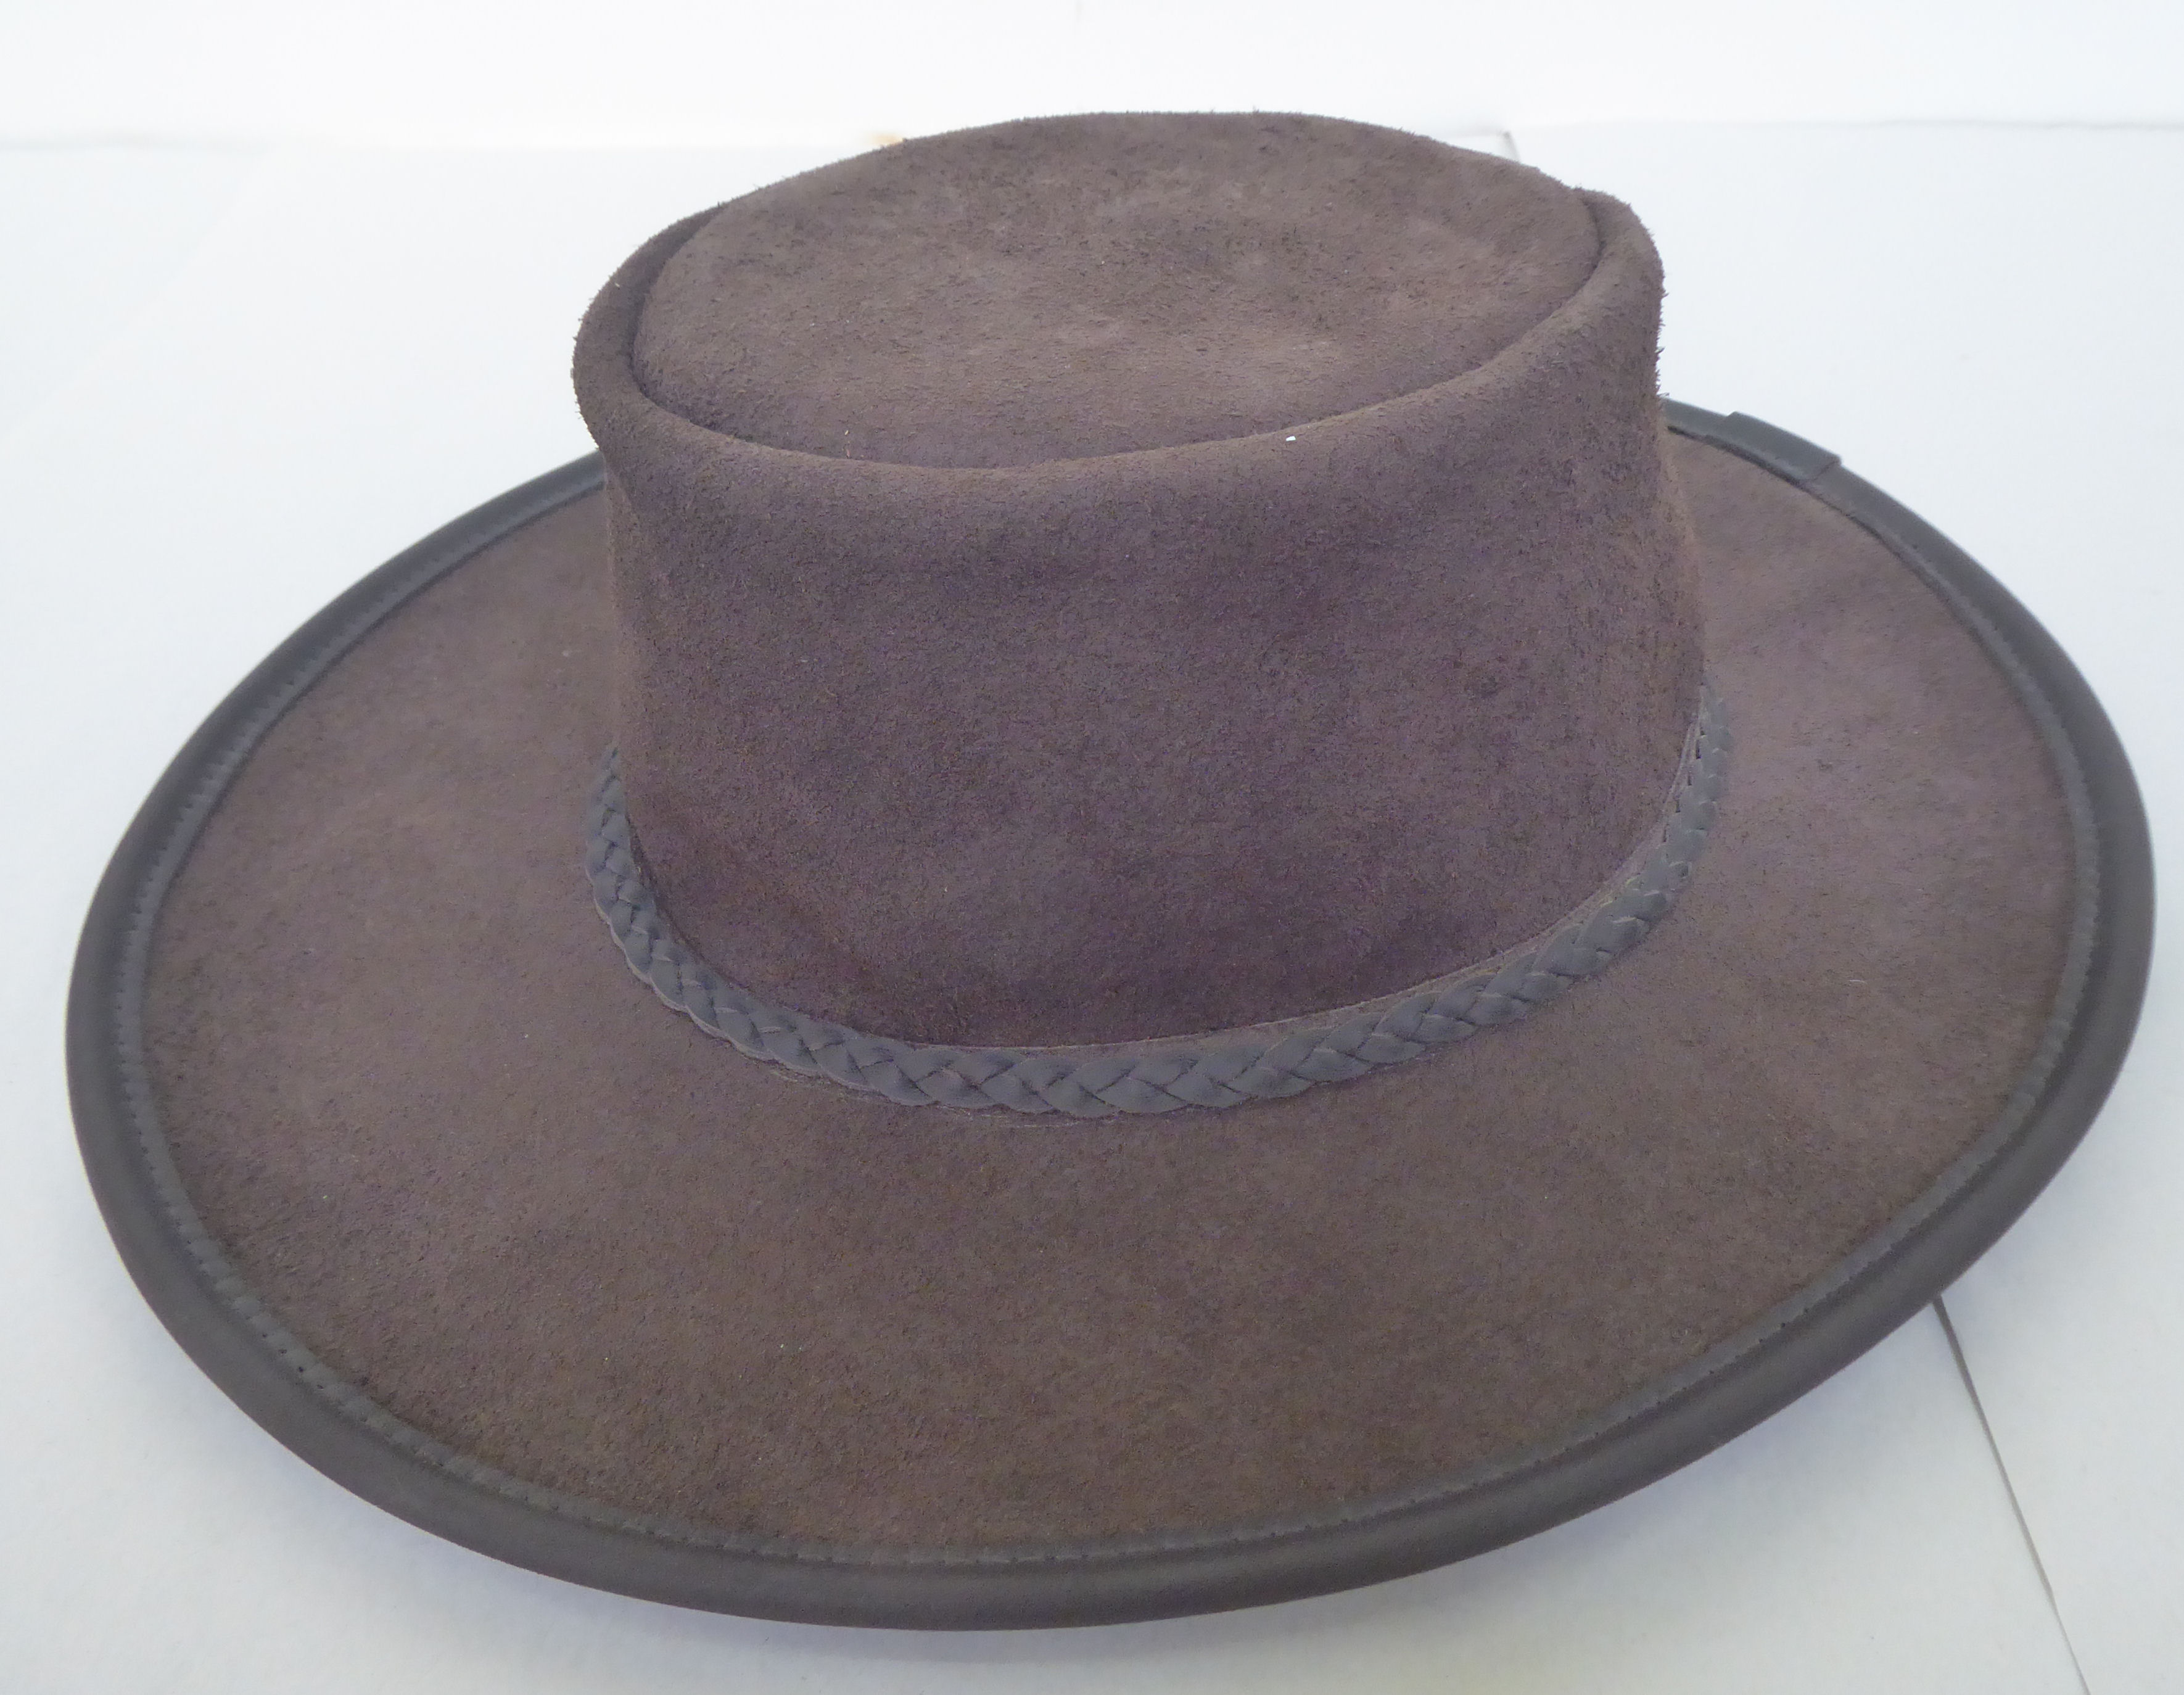 A Great Leather Hat by Sleepy Hollow, in chocolate brown hide  size L - Image 2 of 3